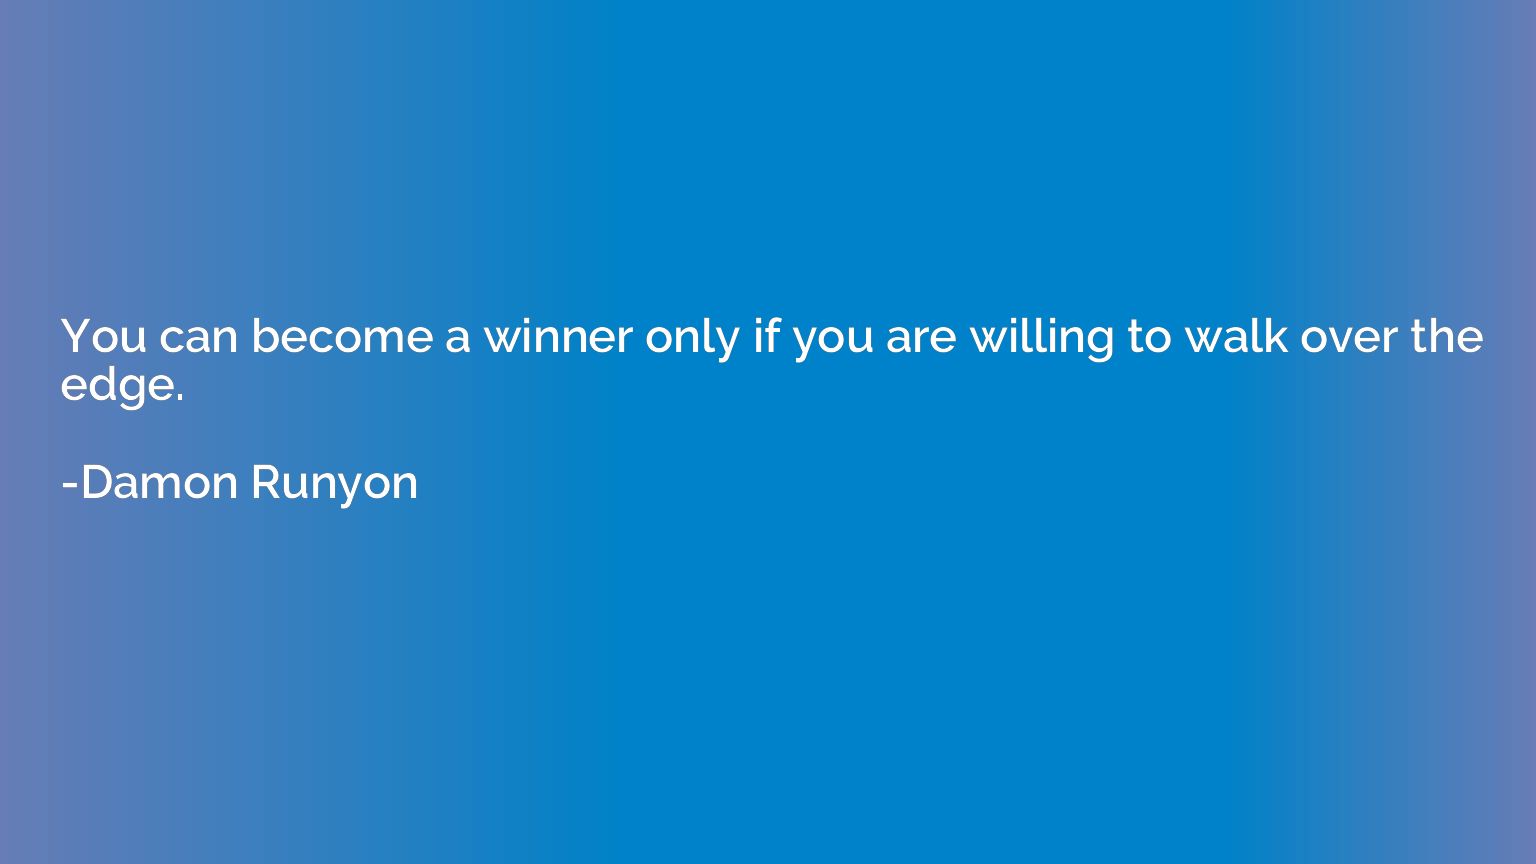 You can become a winner only if you are willing to walk over